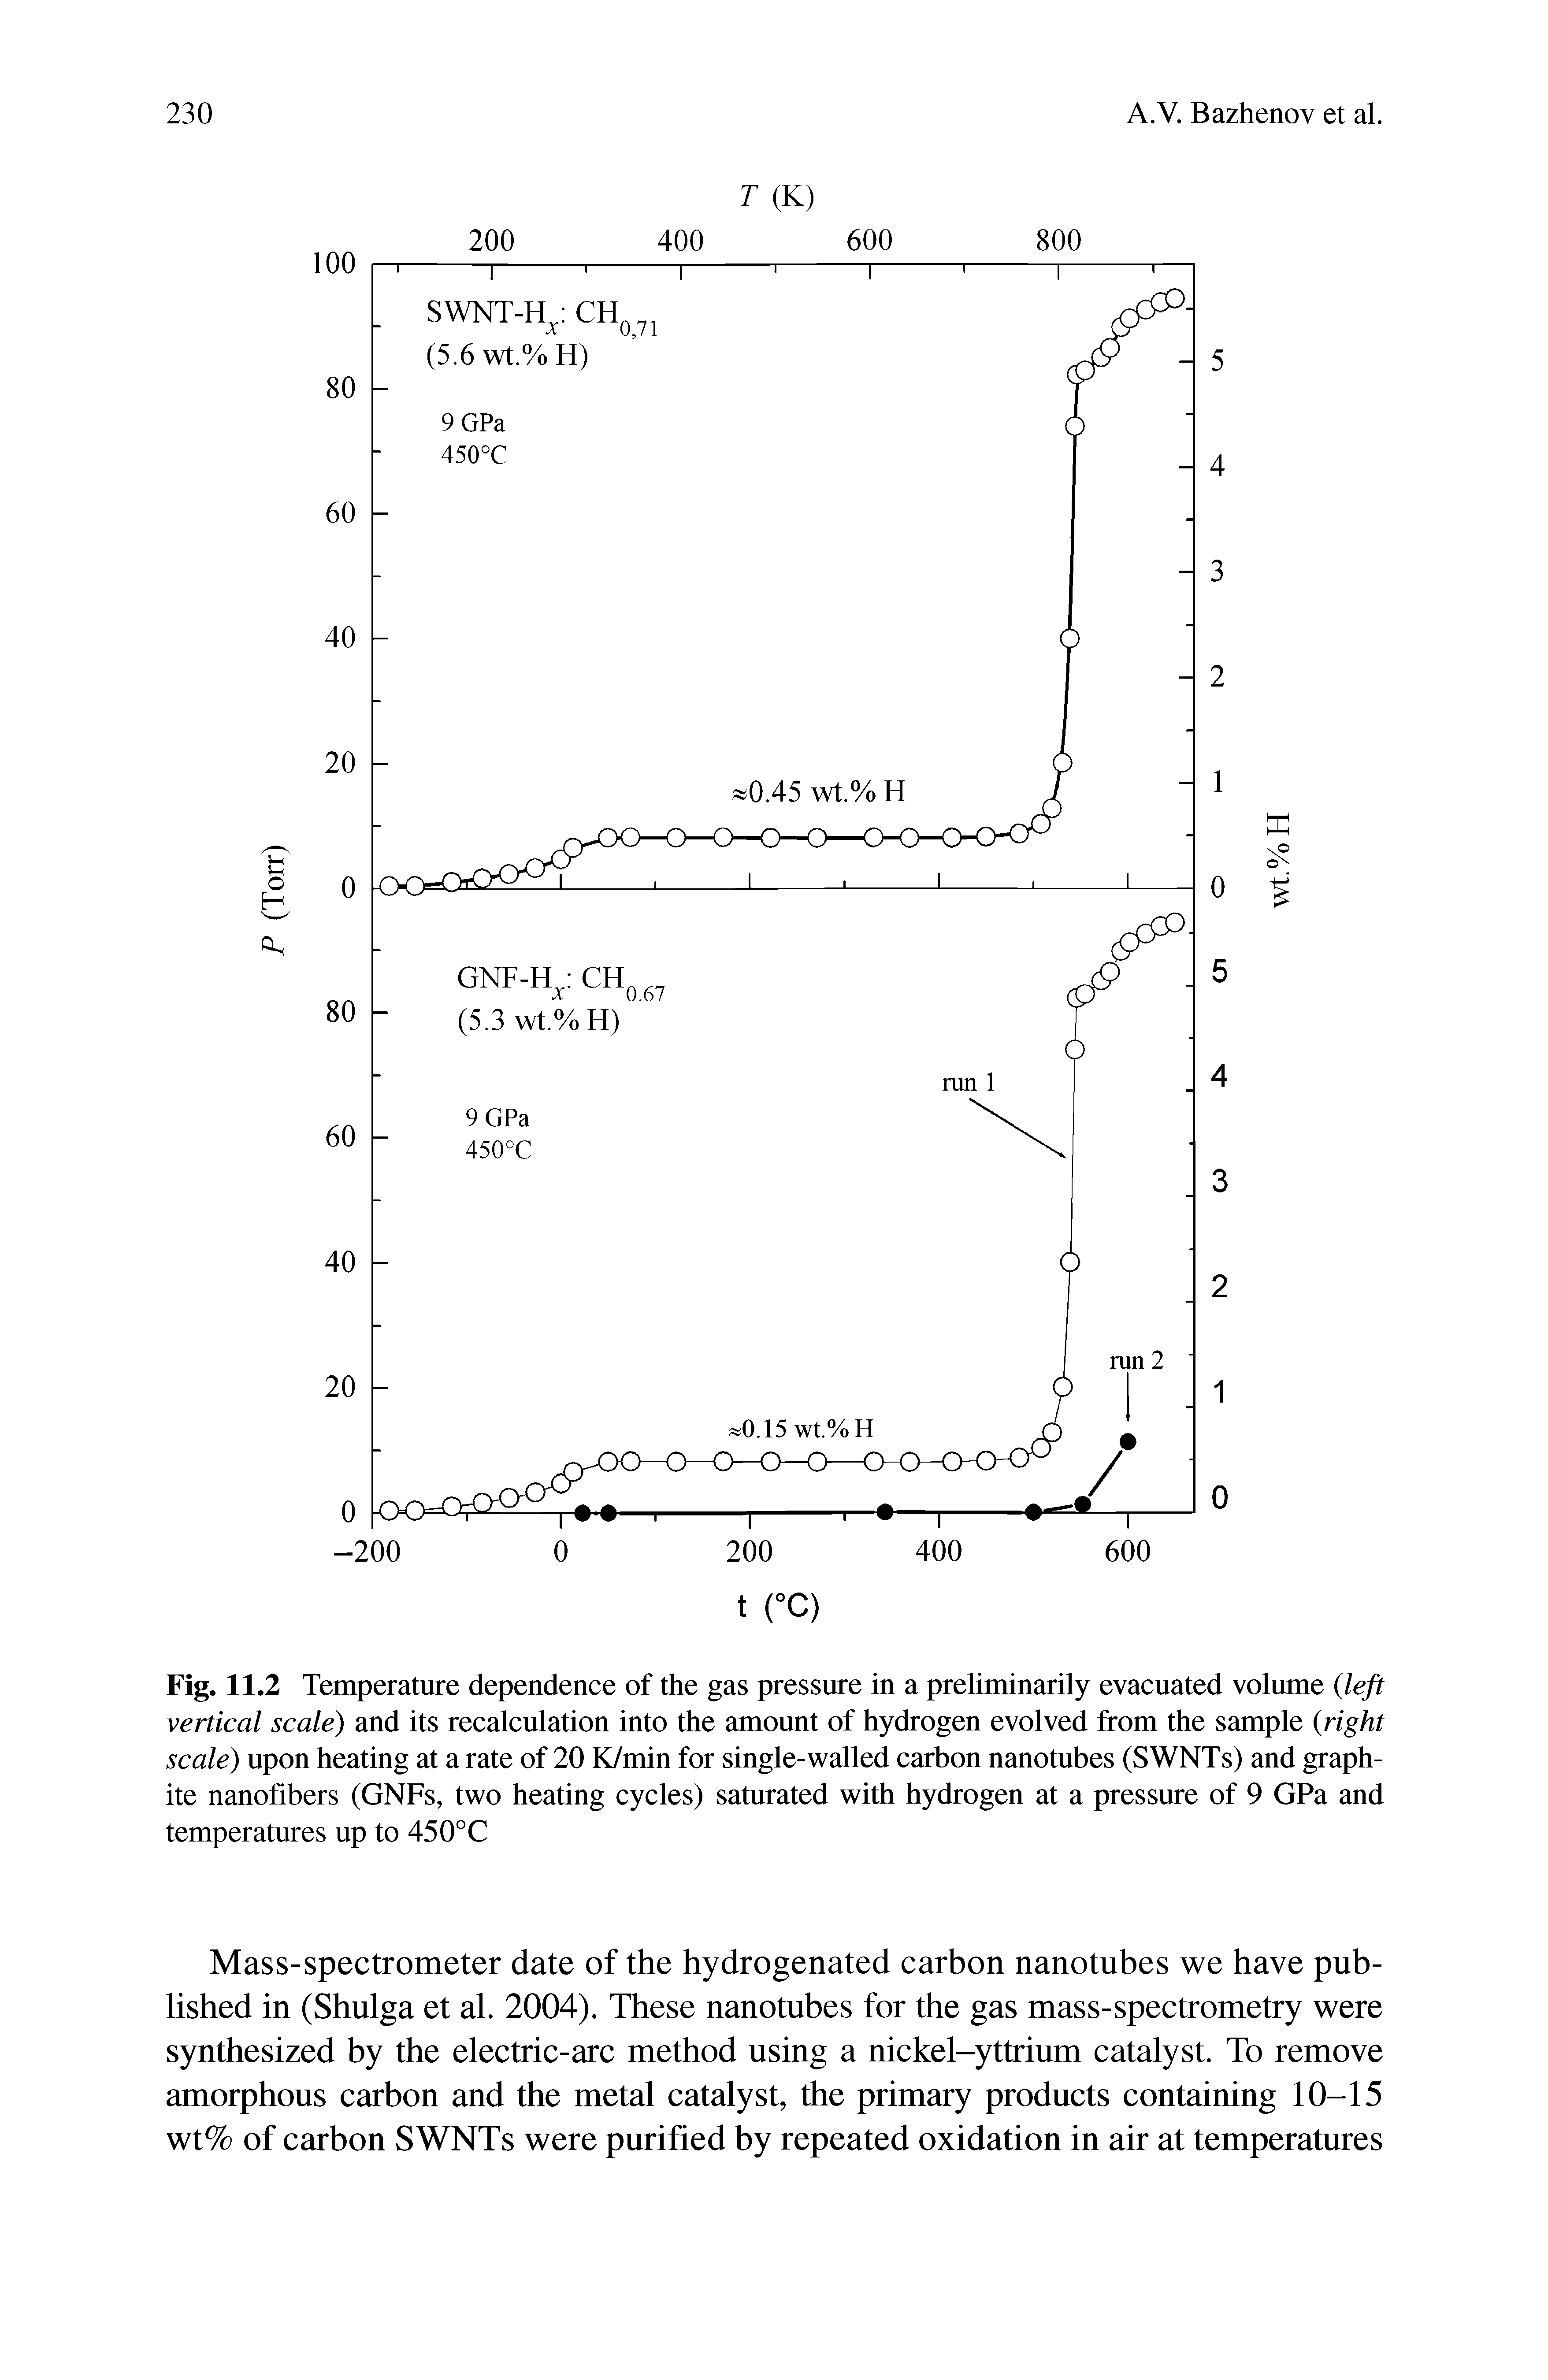 Fig. 11.2 Temperature dependence of the gas pressure in a preliminarily evacuated volume (left vertical scale) and its recalculation into the amount of hydrogen evolved from the sample (right scale) upon heating at a rate of 20 K/min for single-walled carbon nanotubes (SWNTs) and graphite nanofibers (GNFs, two heating cycles) saturated with hydrogen at a pressure of 9 GPa and temperatures up to 450°C...